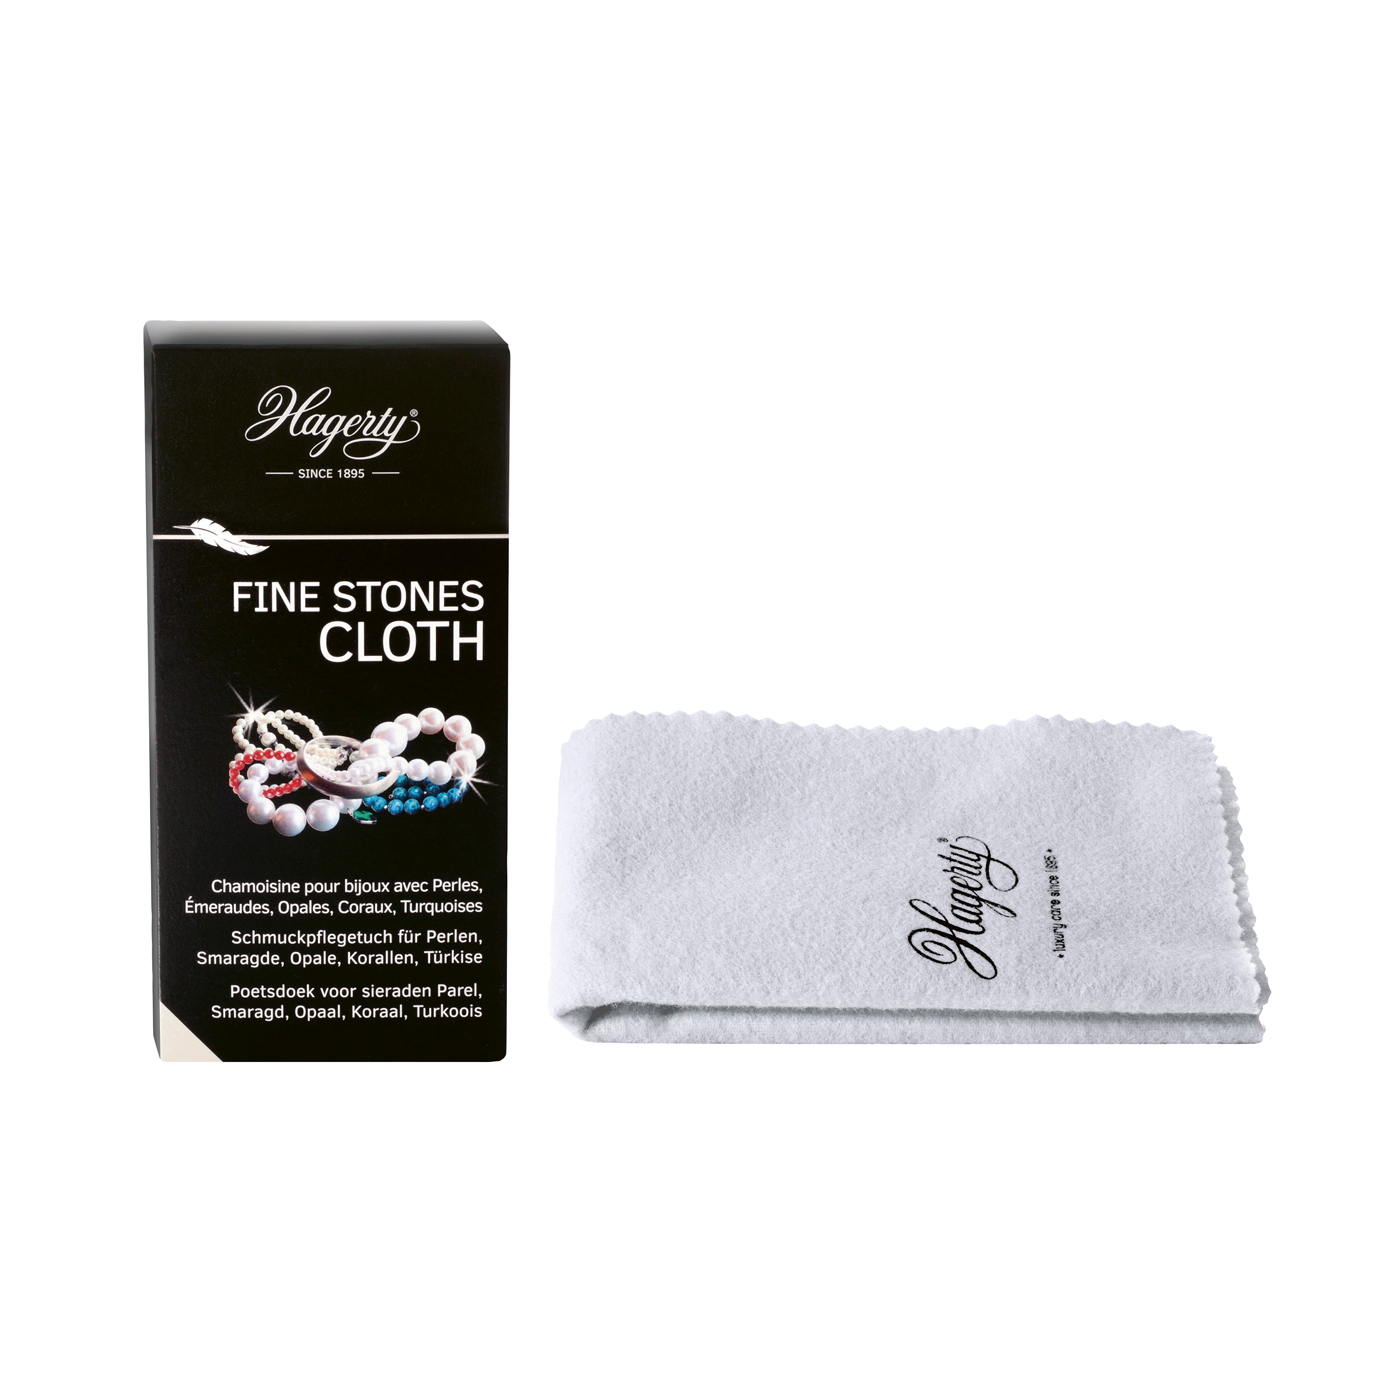 Hagerty Fine Stones Jewellery Cleaning Cloth - 1 piece